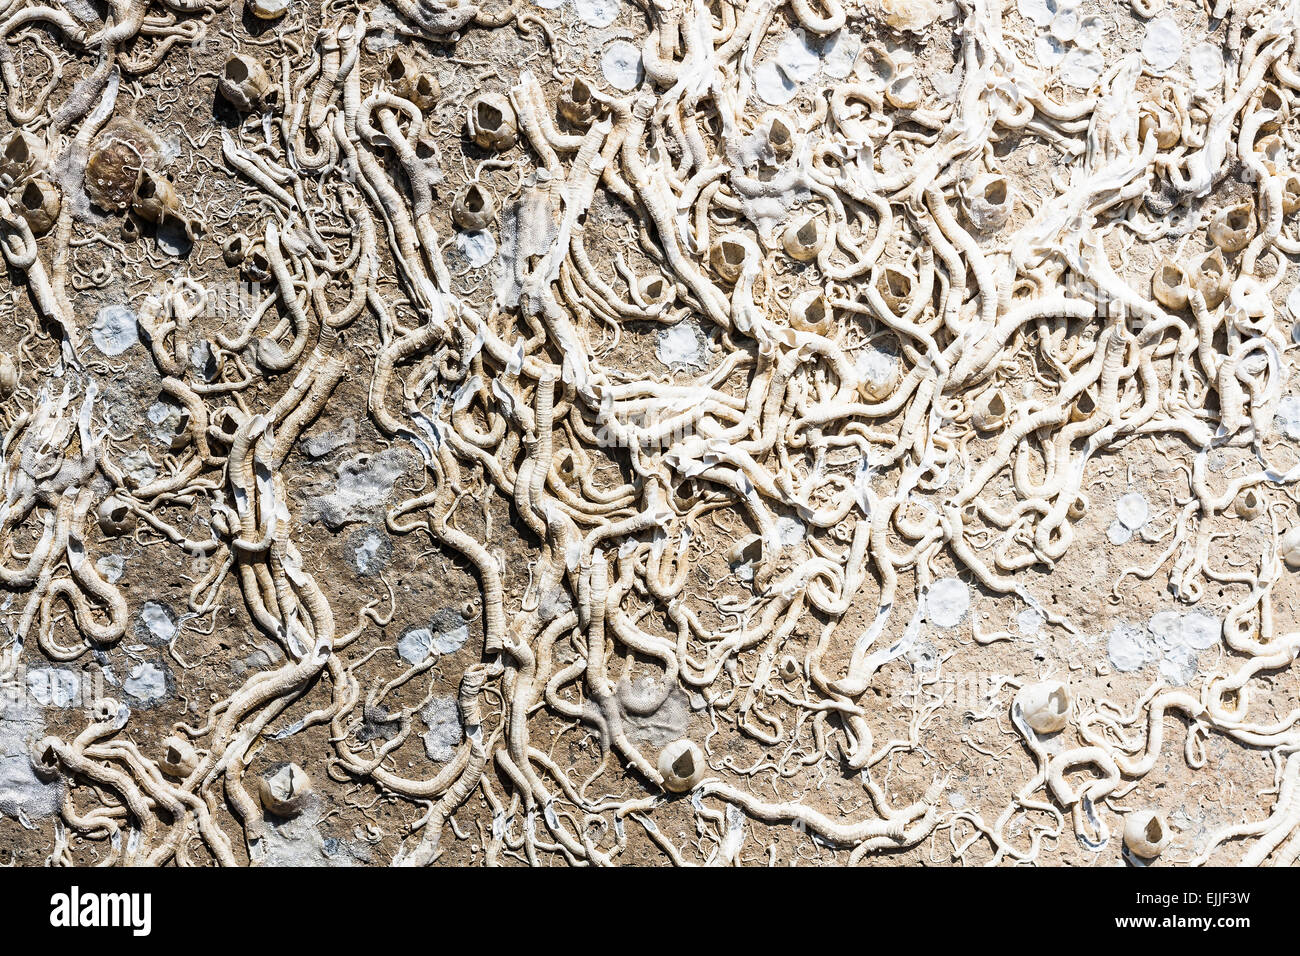 Encrustation of the sea. Texture of old marine life forms Stock Photo